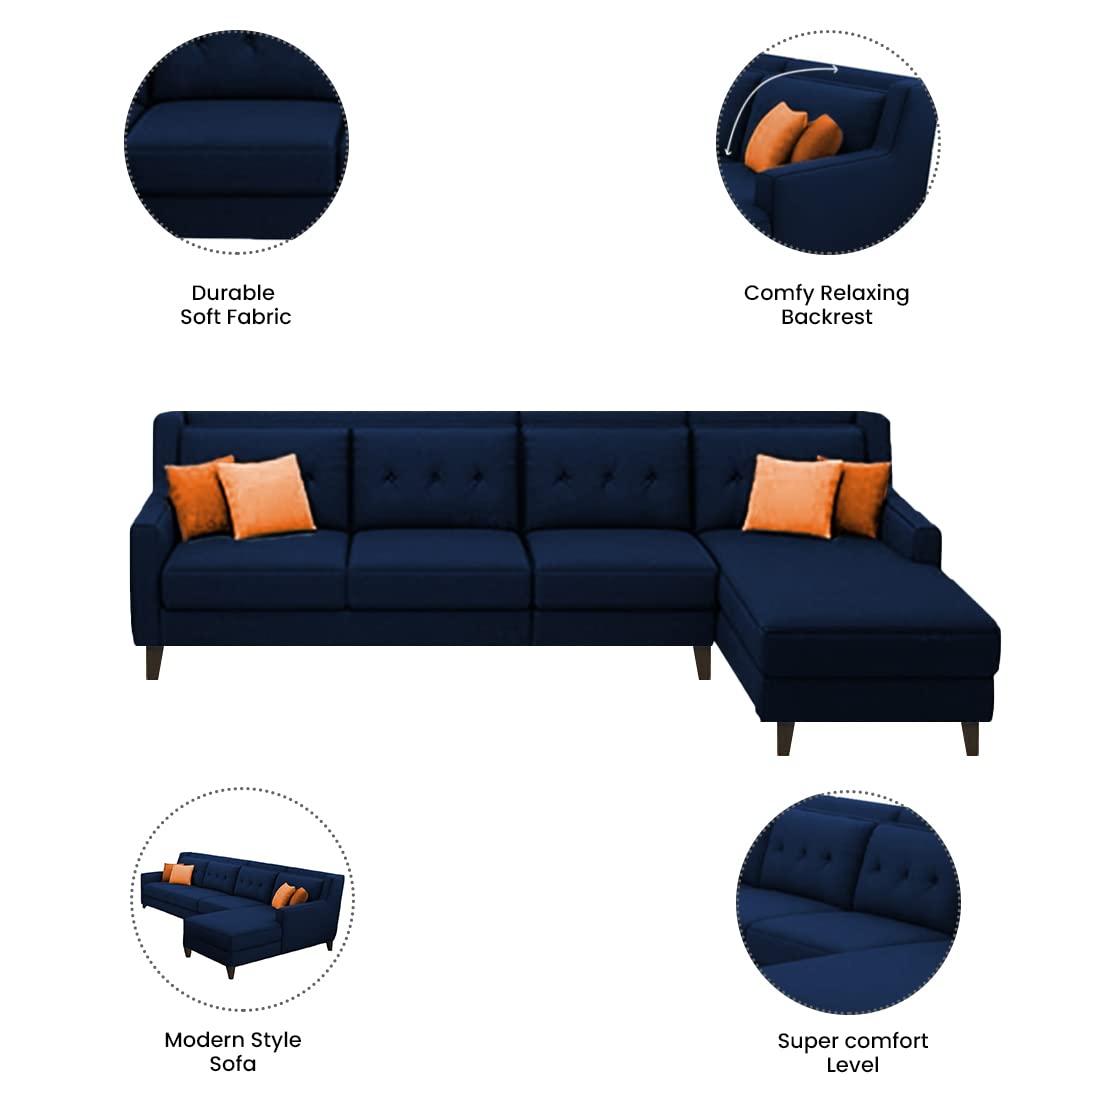 Torque India Milner L Shape 6 Seater Fabric Sofa with Ottoman For Living Room - Torque India